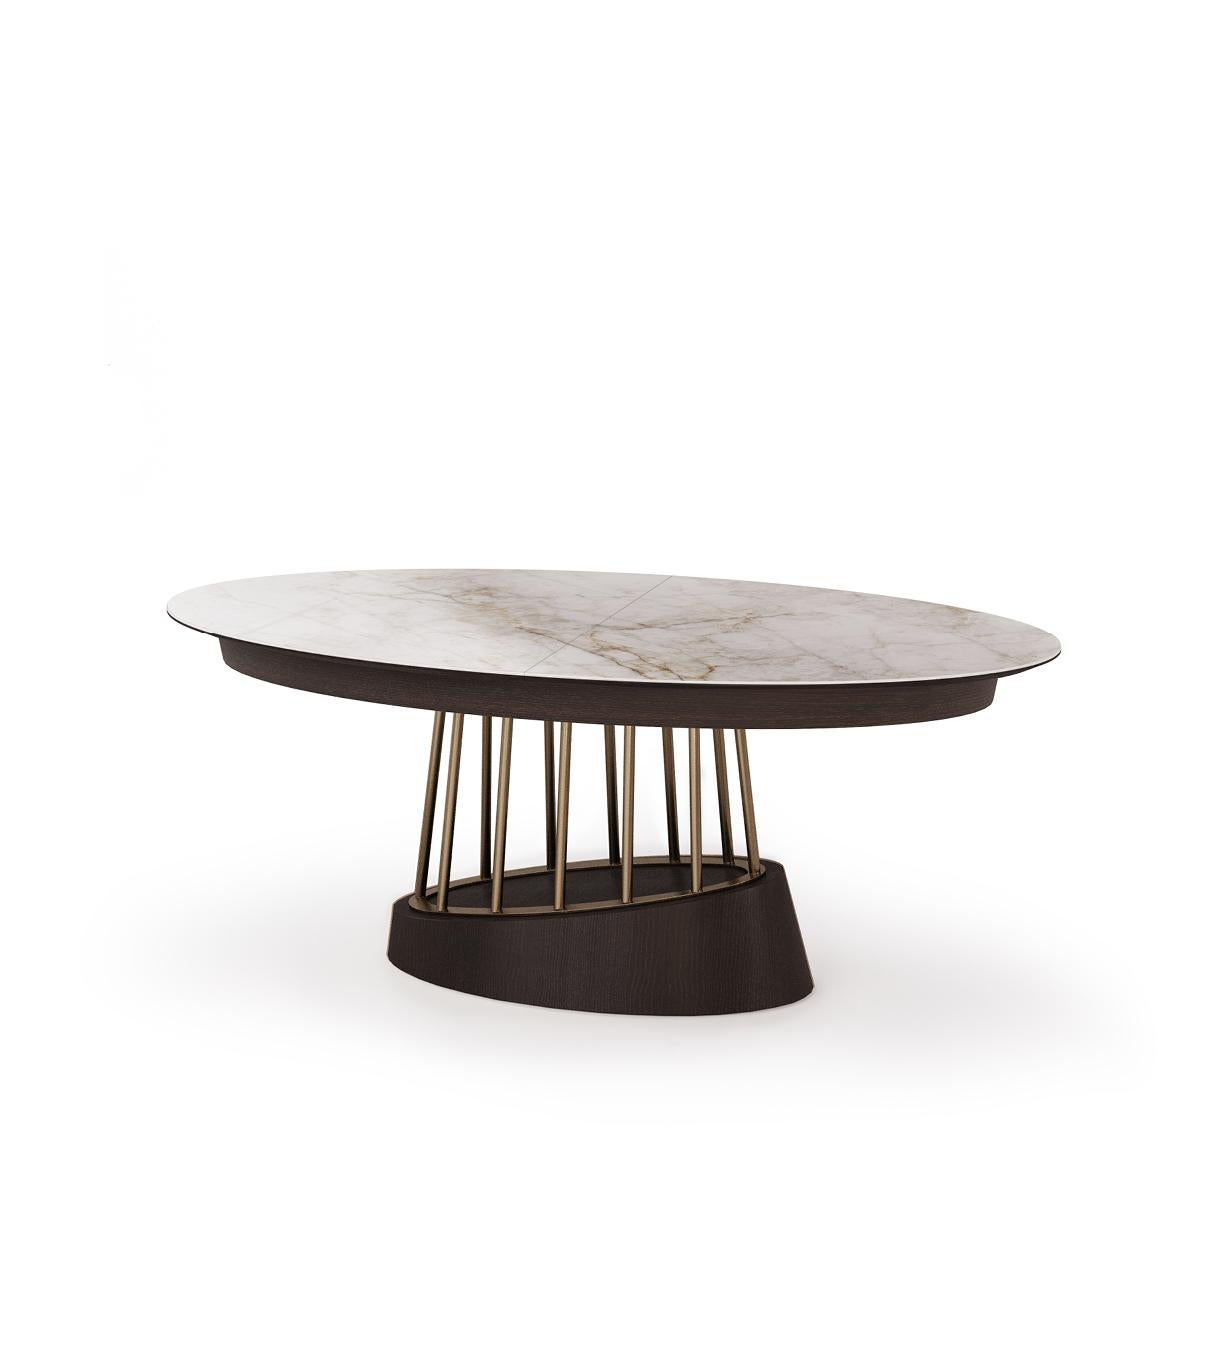 Portuguese ZAGAS Elipse Extensible Dining Table For Sale